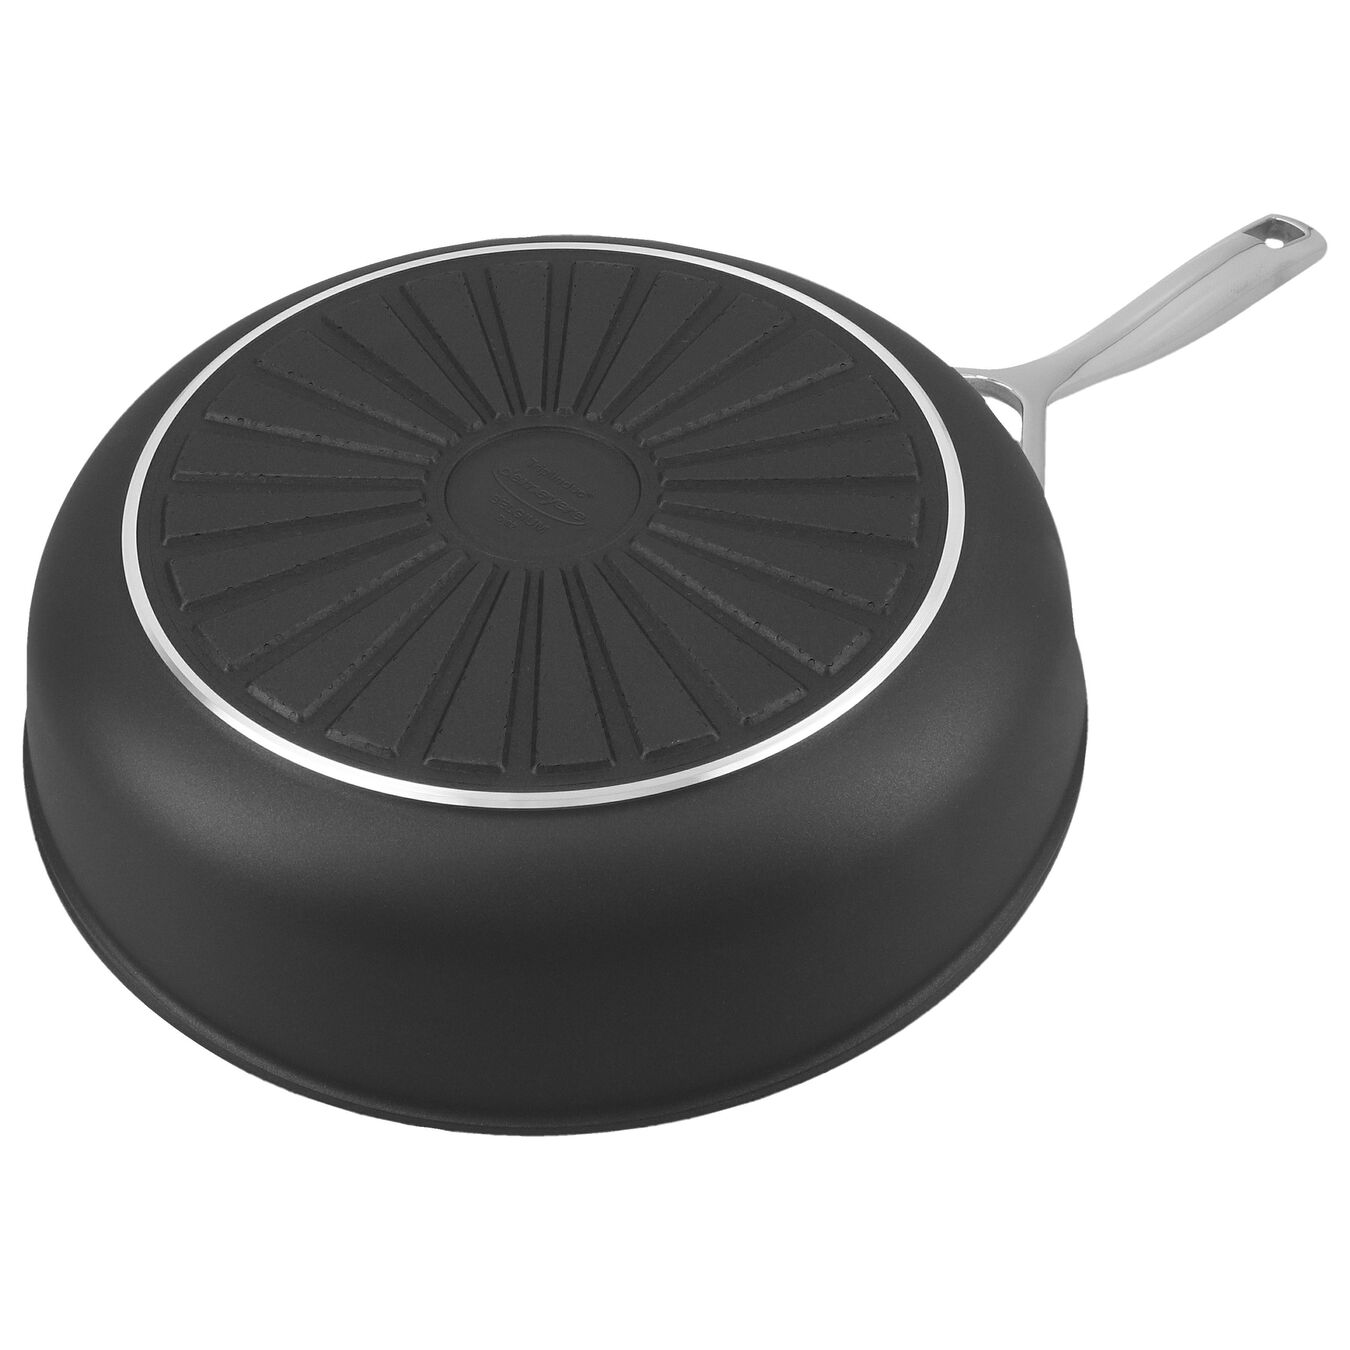 24 cm Aluminum Frying pan high-sided silver-black,,large 3